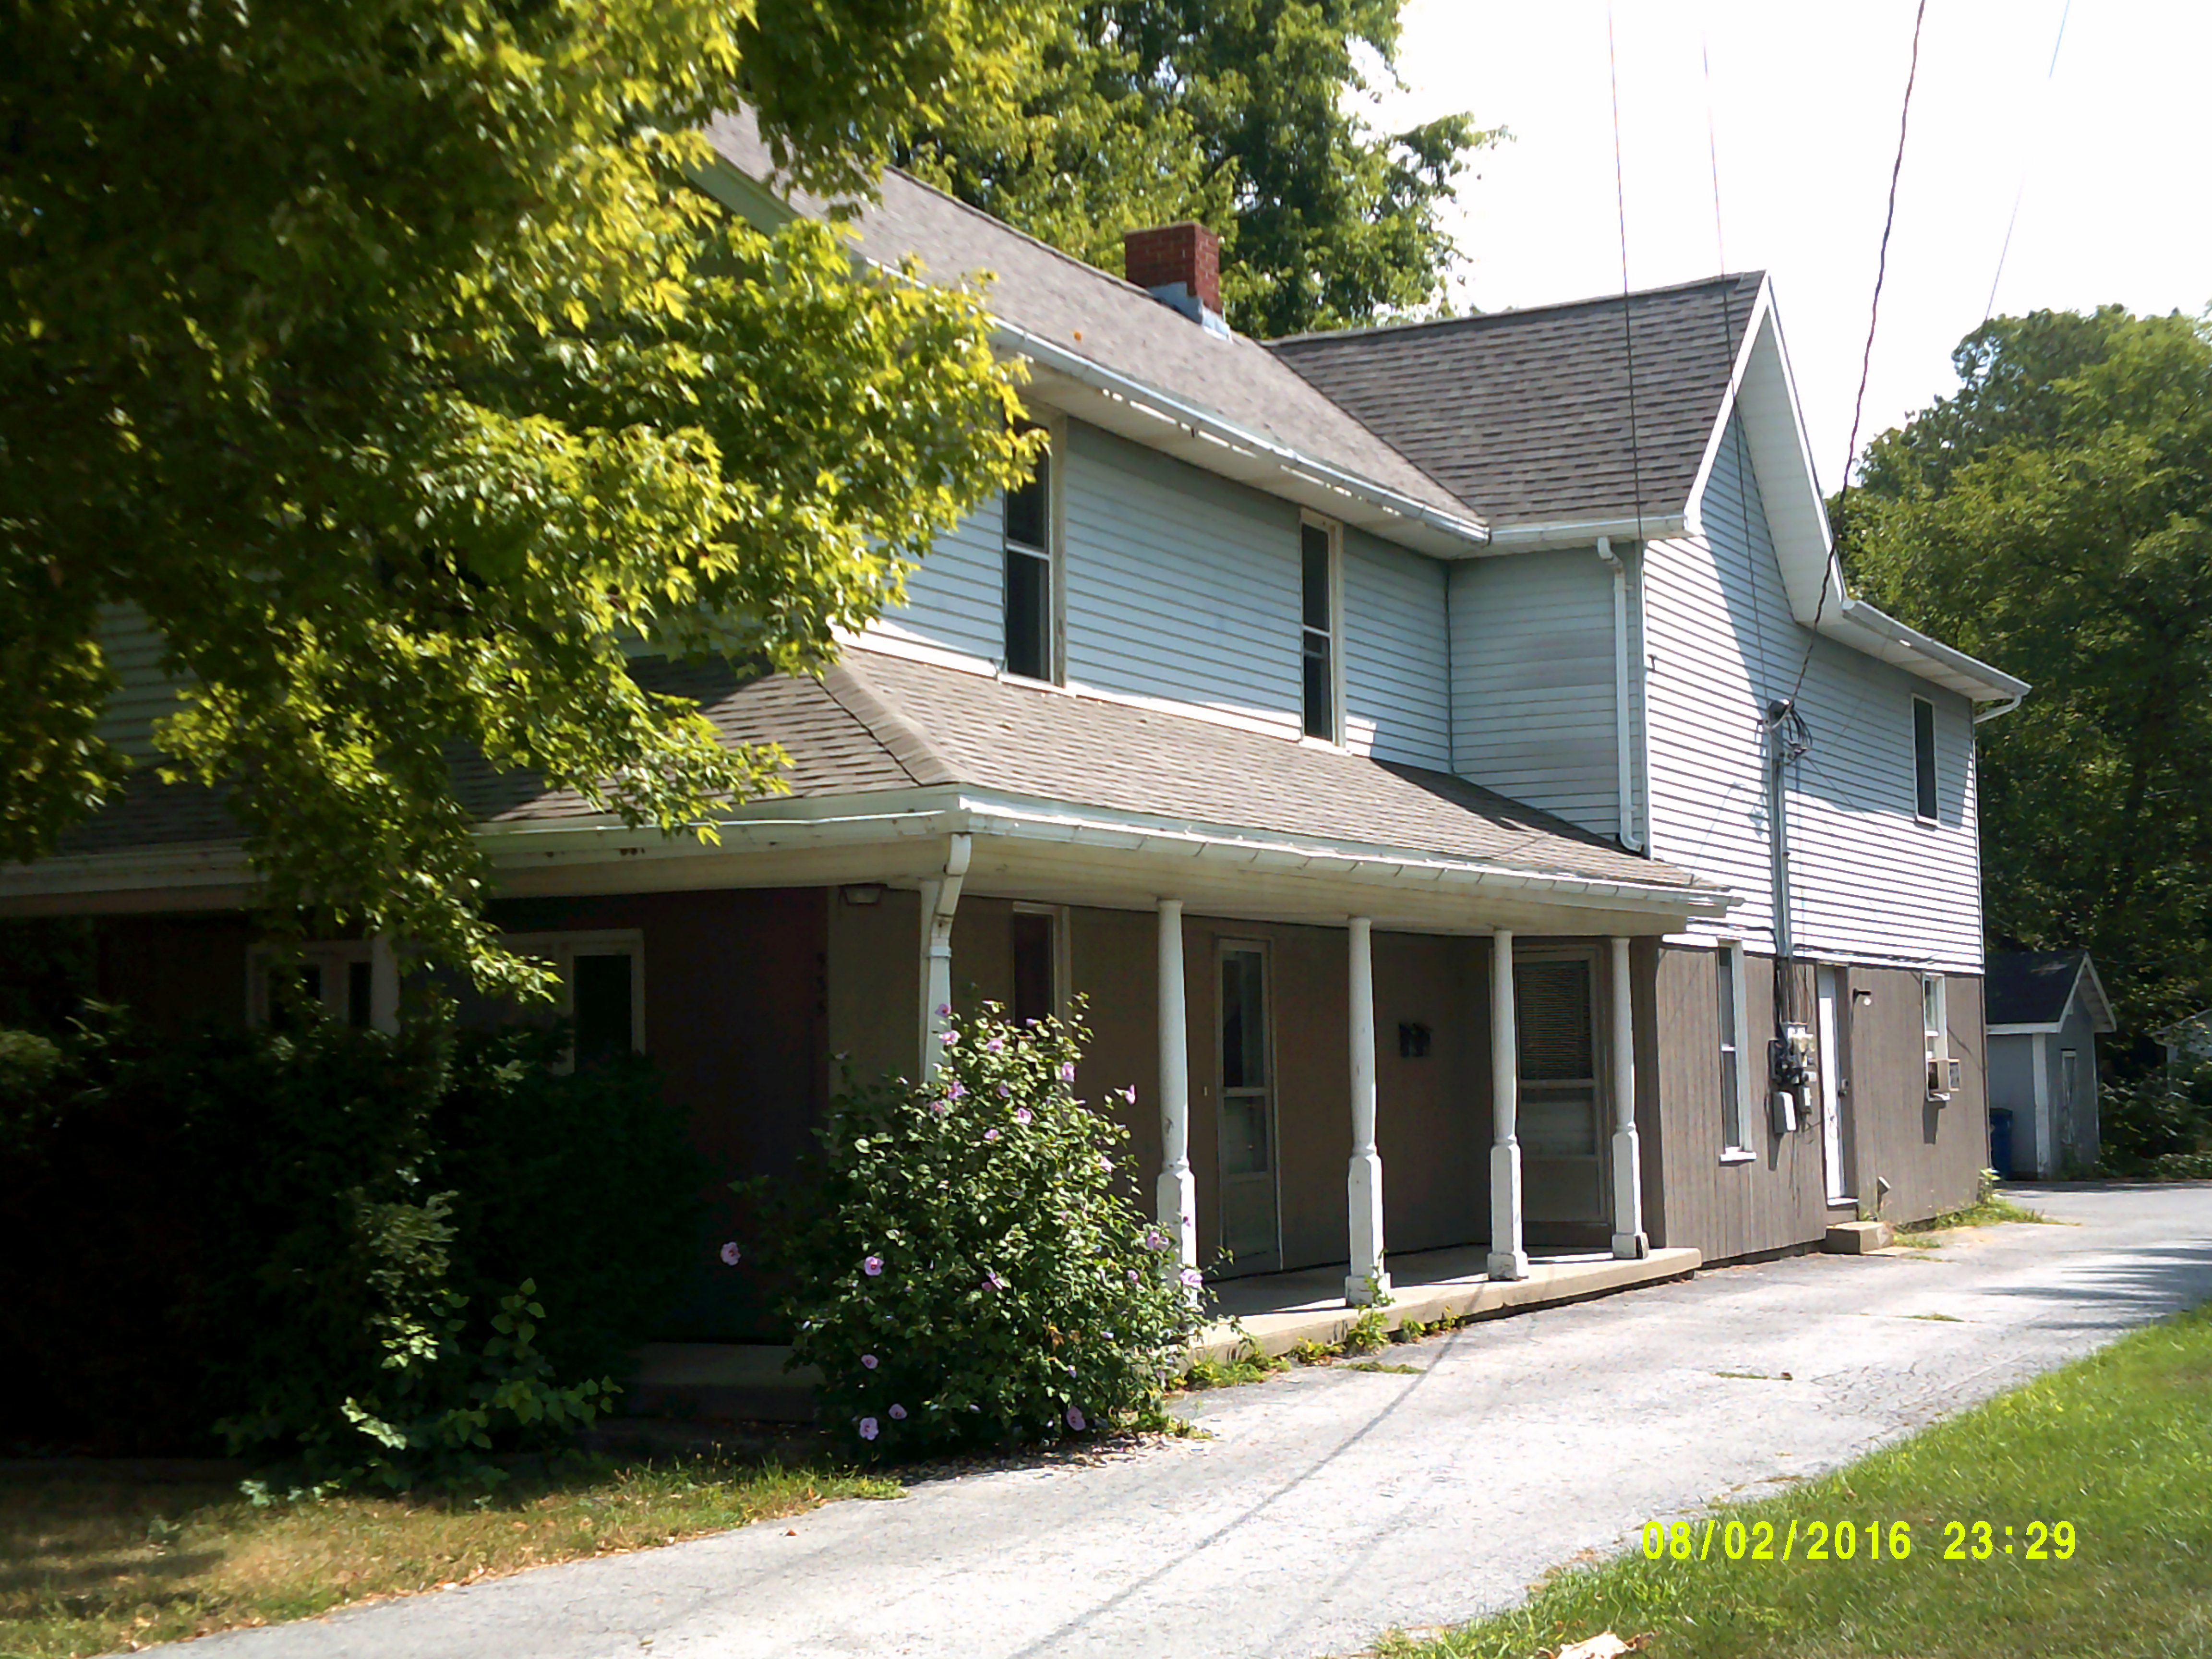 535 S. Maple St. - A, Bowling Green, OH  43402